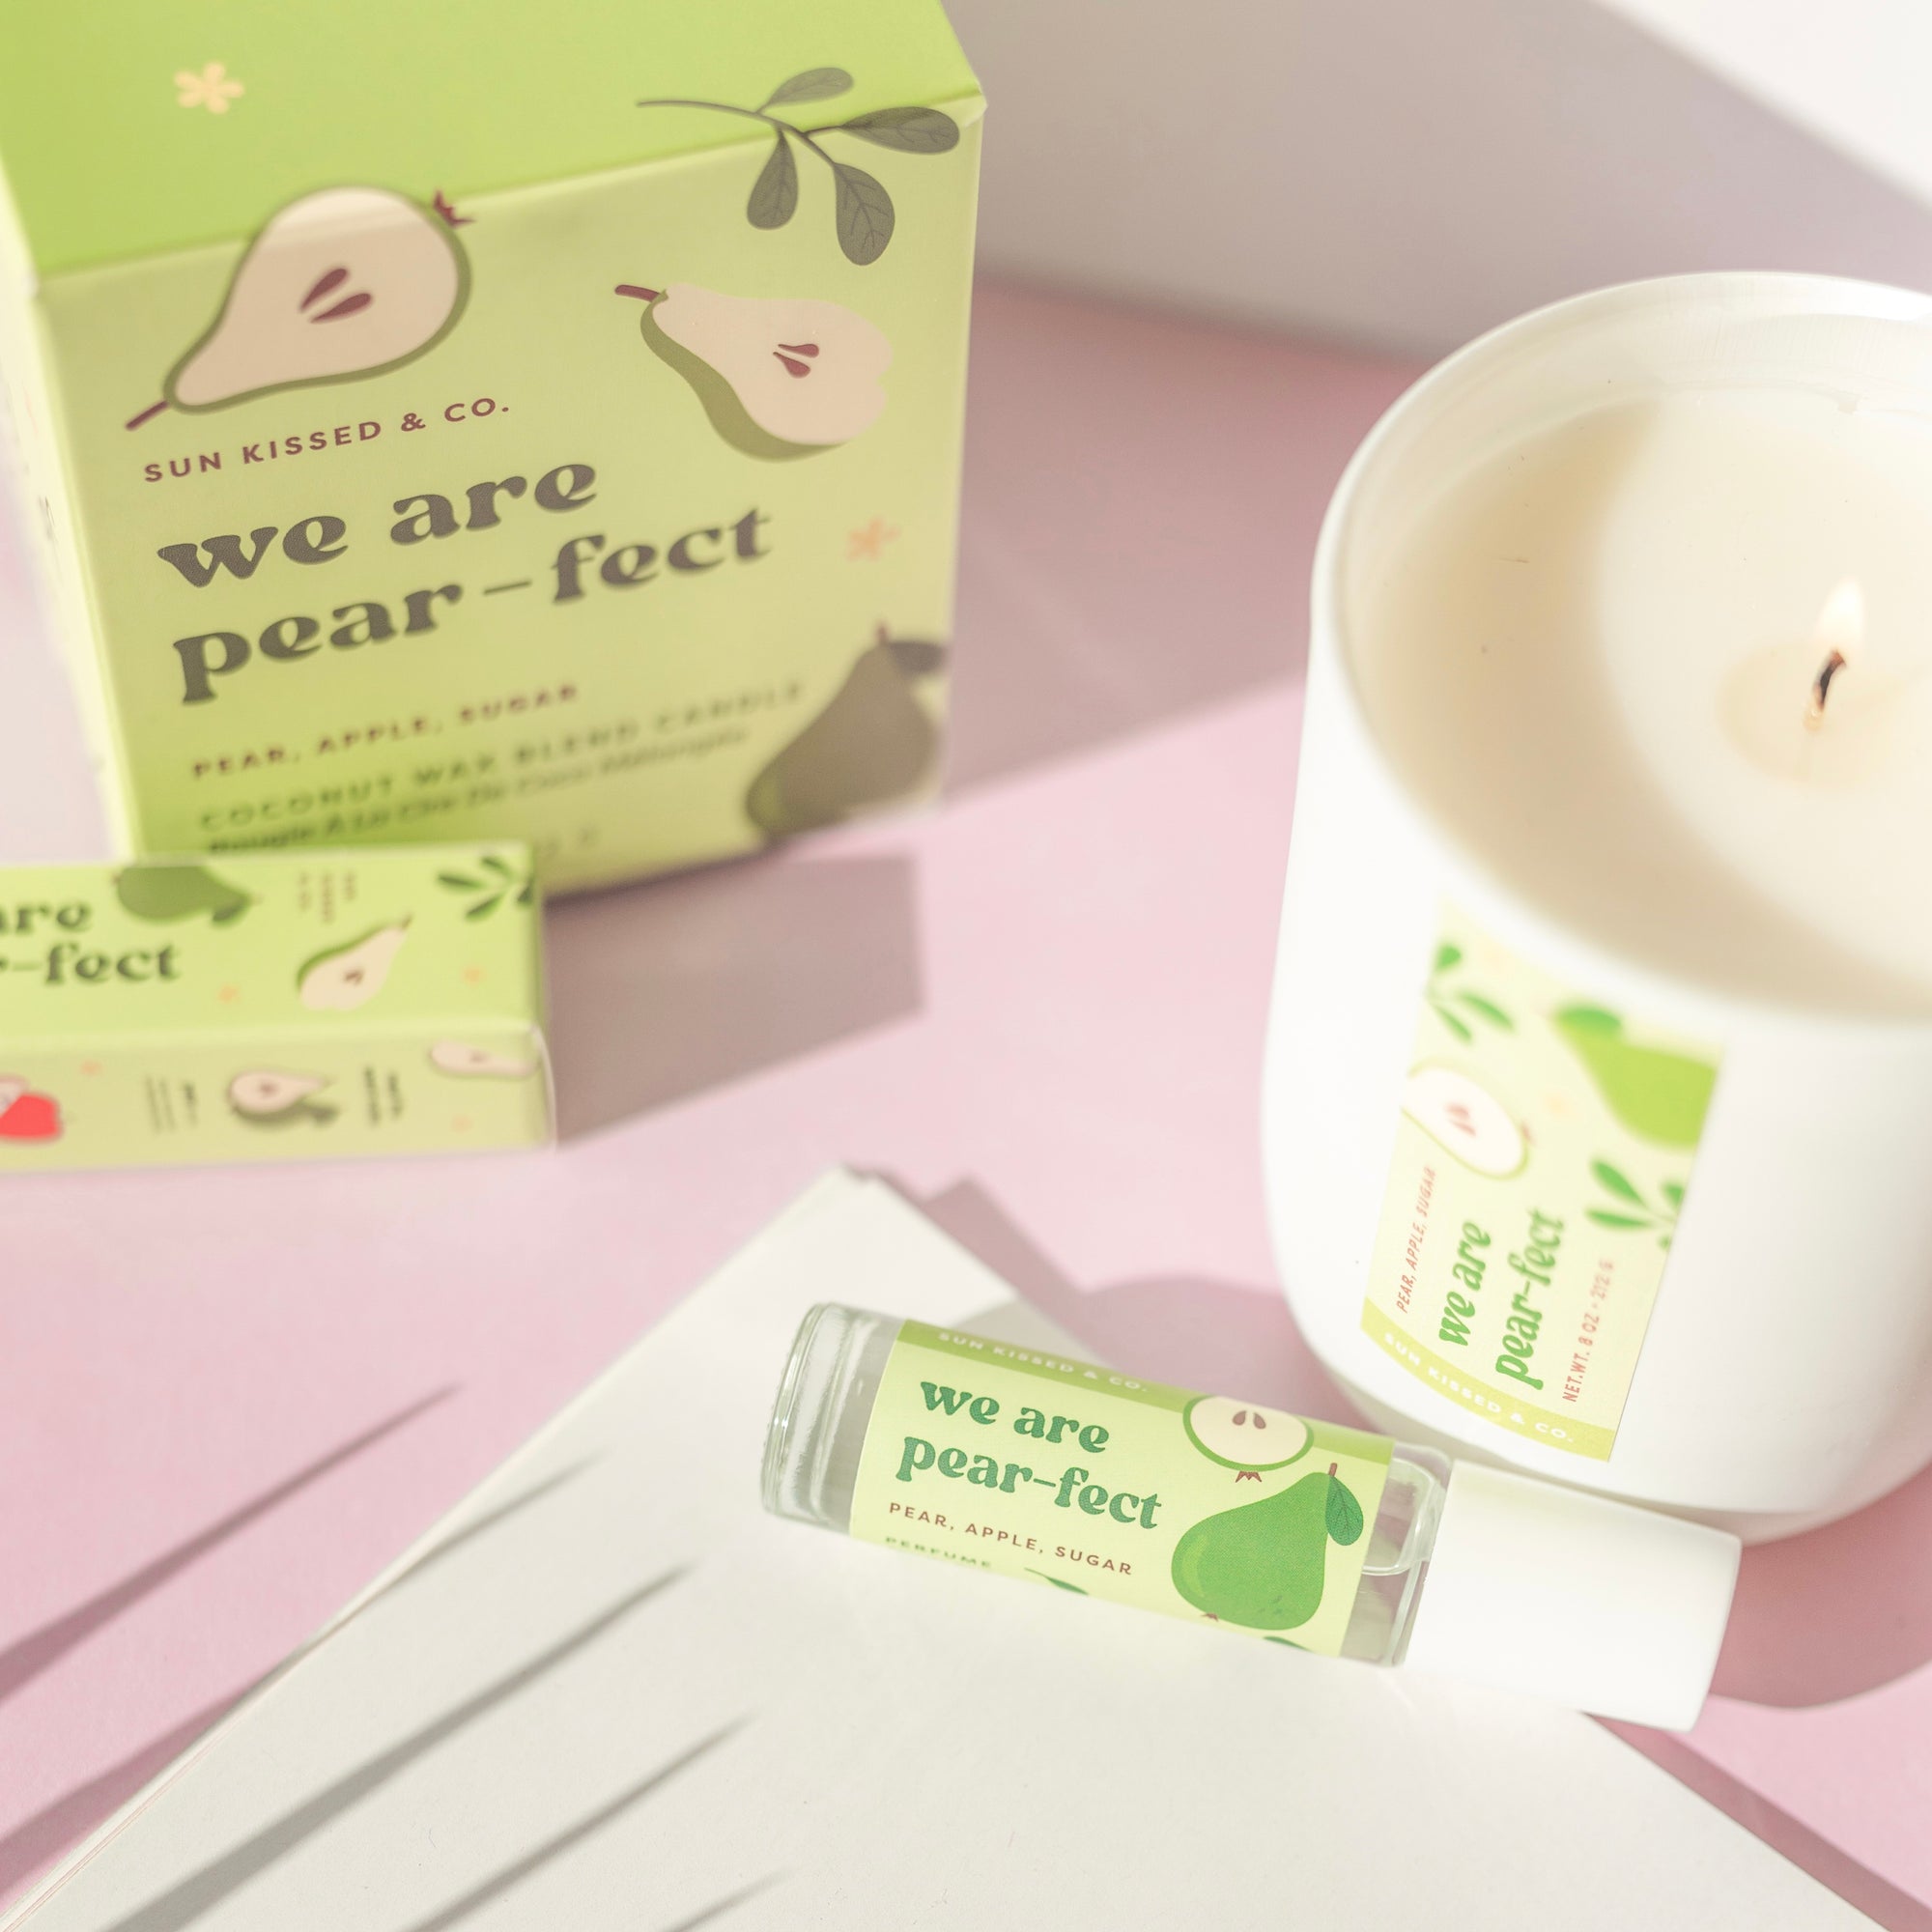 We Are Pear-fect Perfume